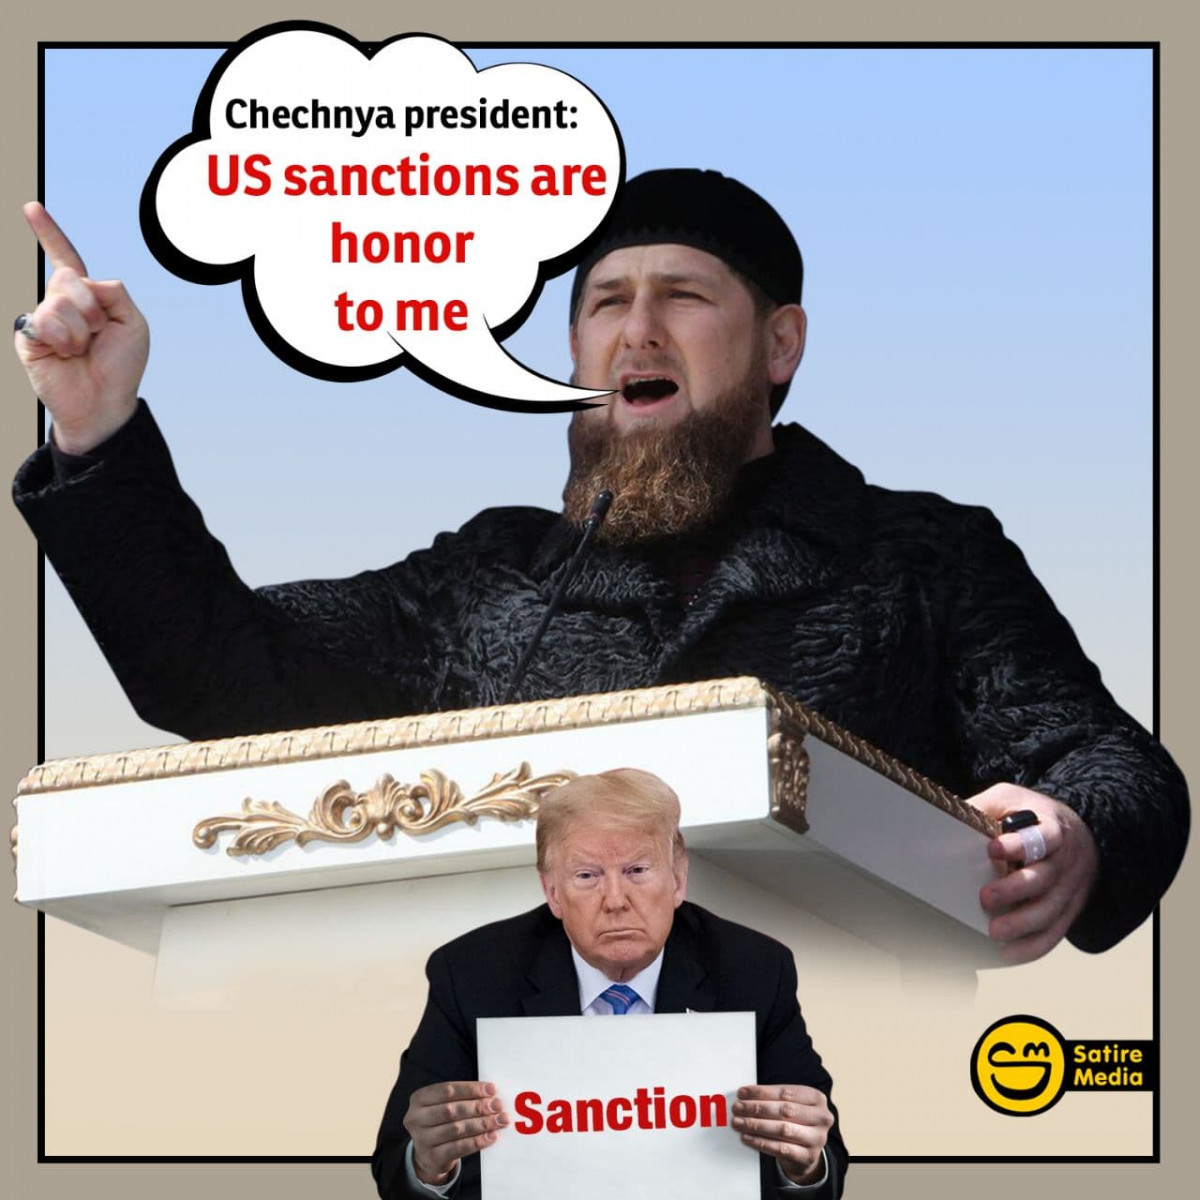 Chechnya president: US sanctions are honor to me